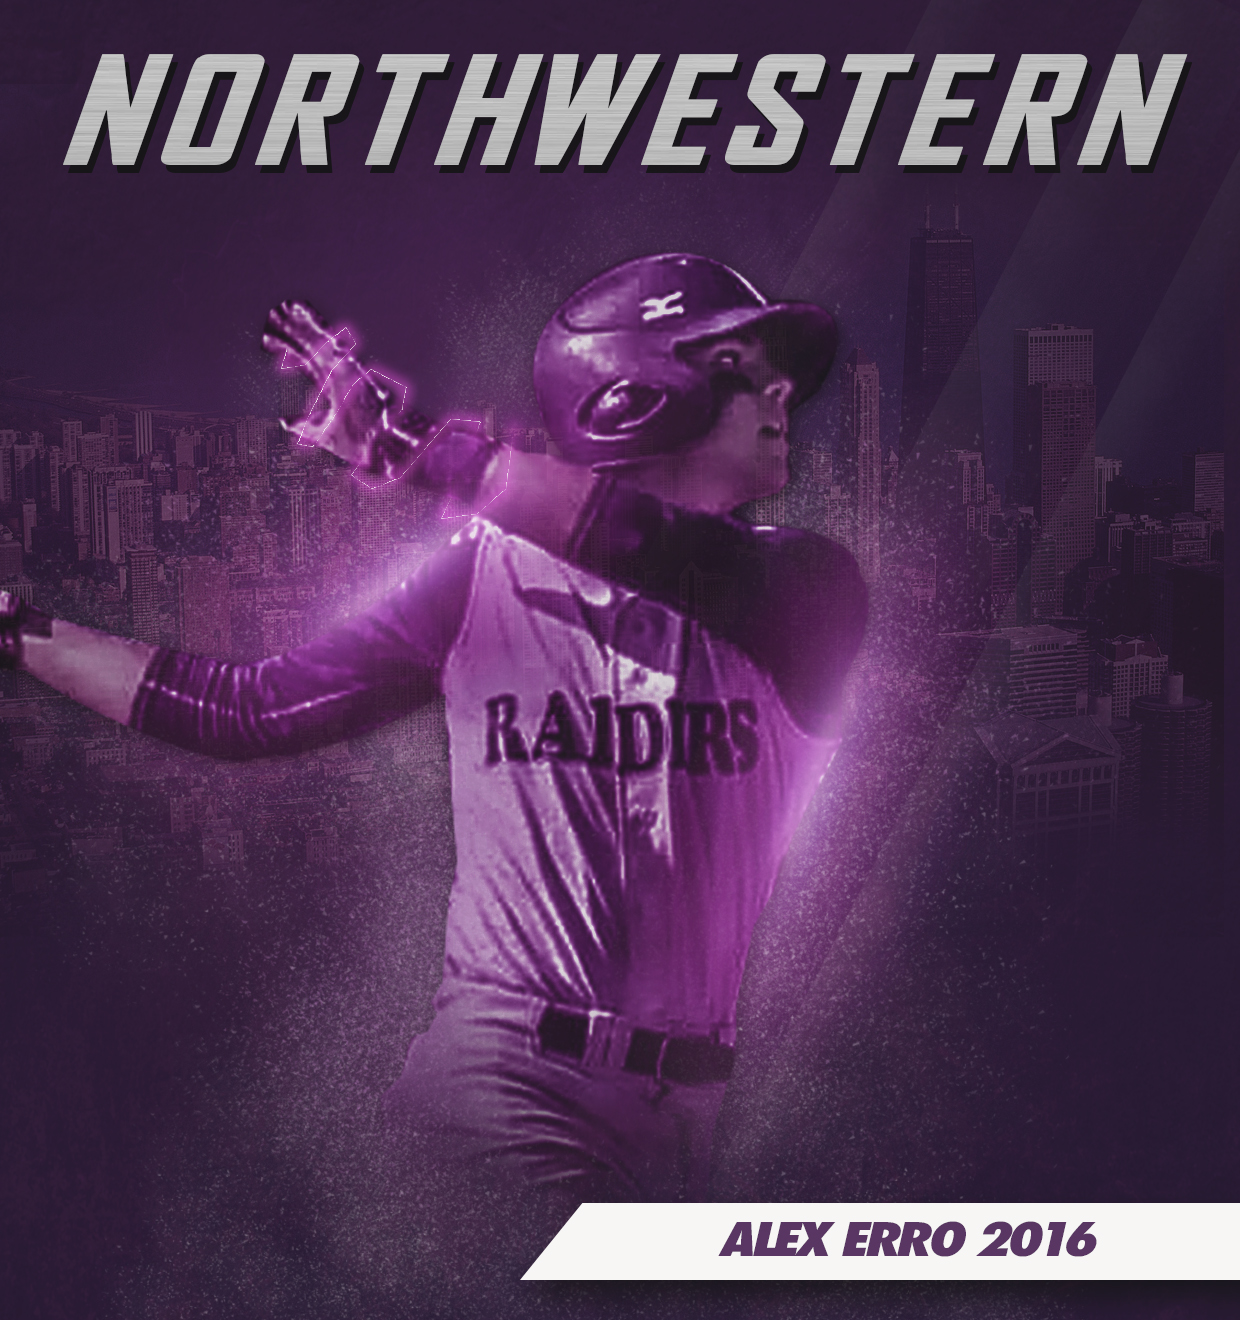 You are currently viewing Erro to Northwestern!